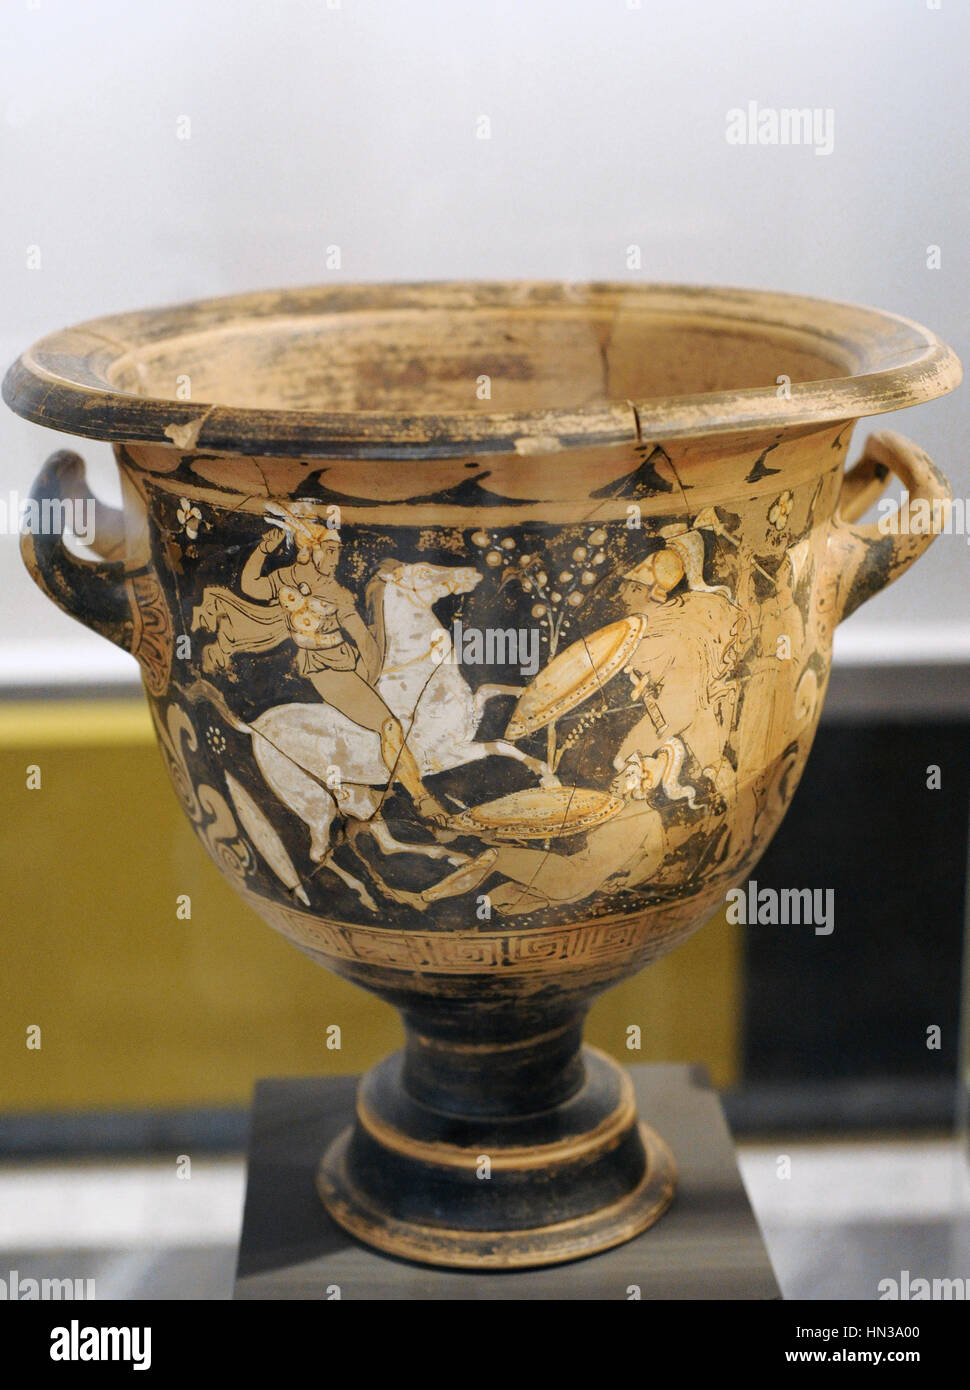 Krater depicting a battle between Samnite warriors. Made in Campania. From Montesarchio. Libation Painter. 350-325 BC. National Archeological Museum Sannio Caudino. Montesarchio. Italy. Stock Photo